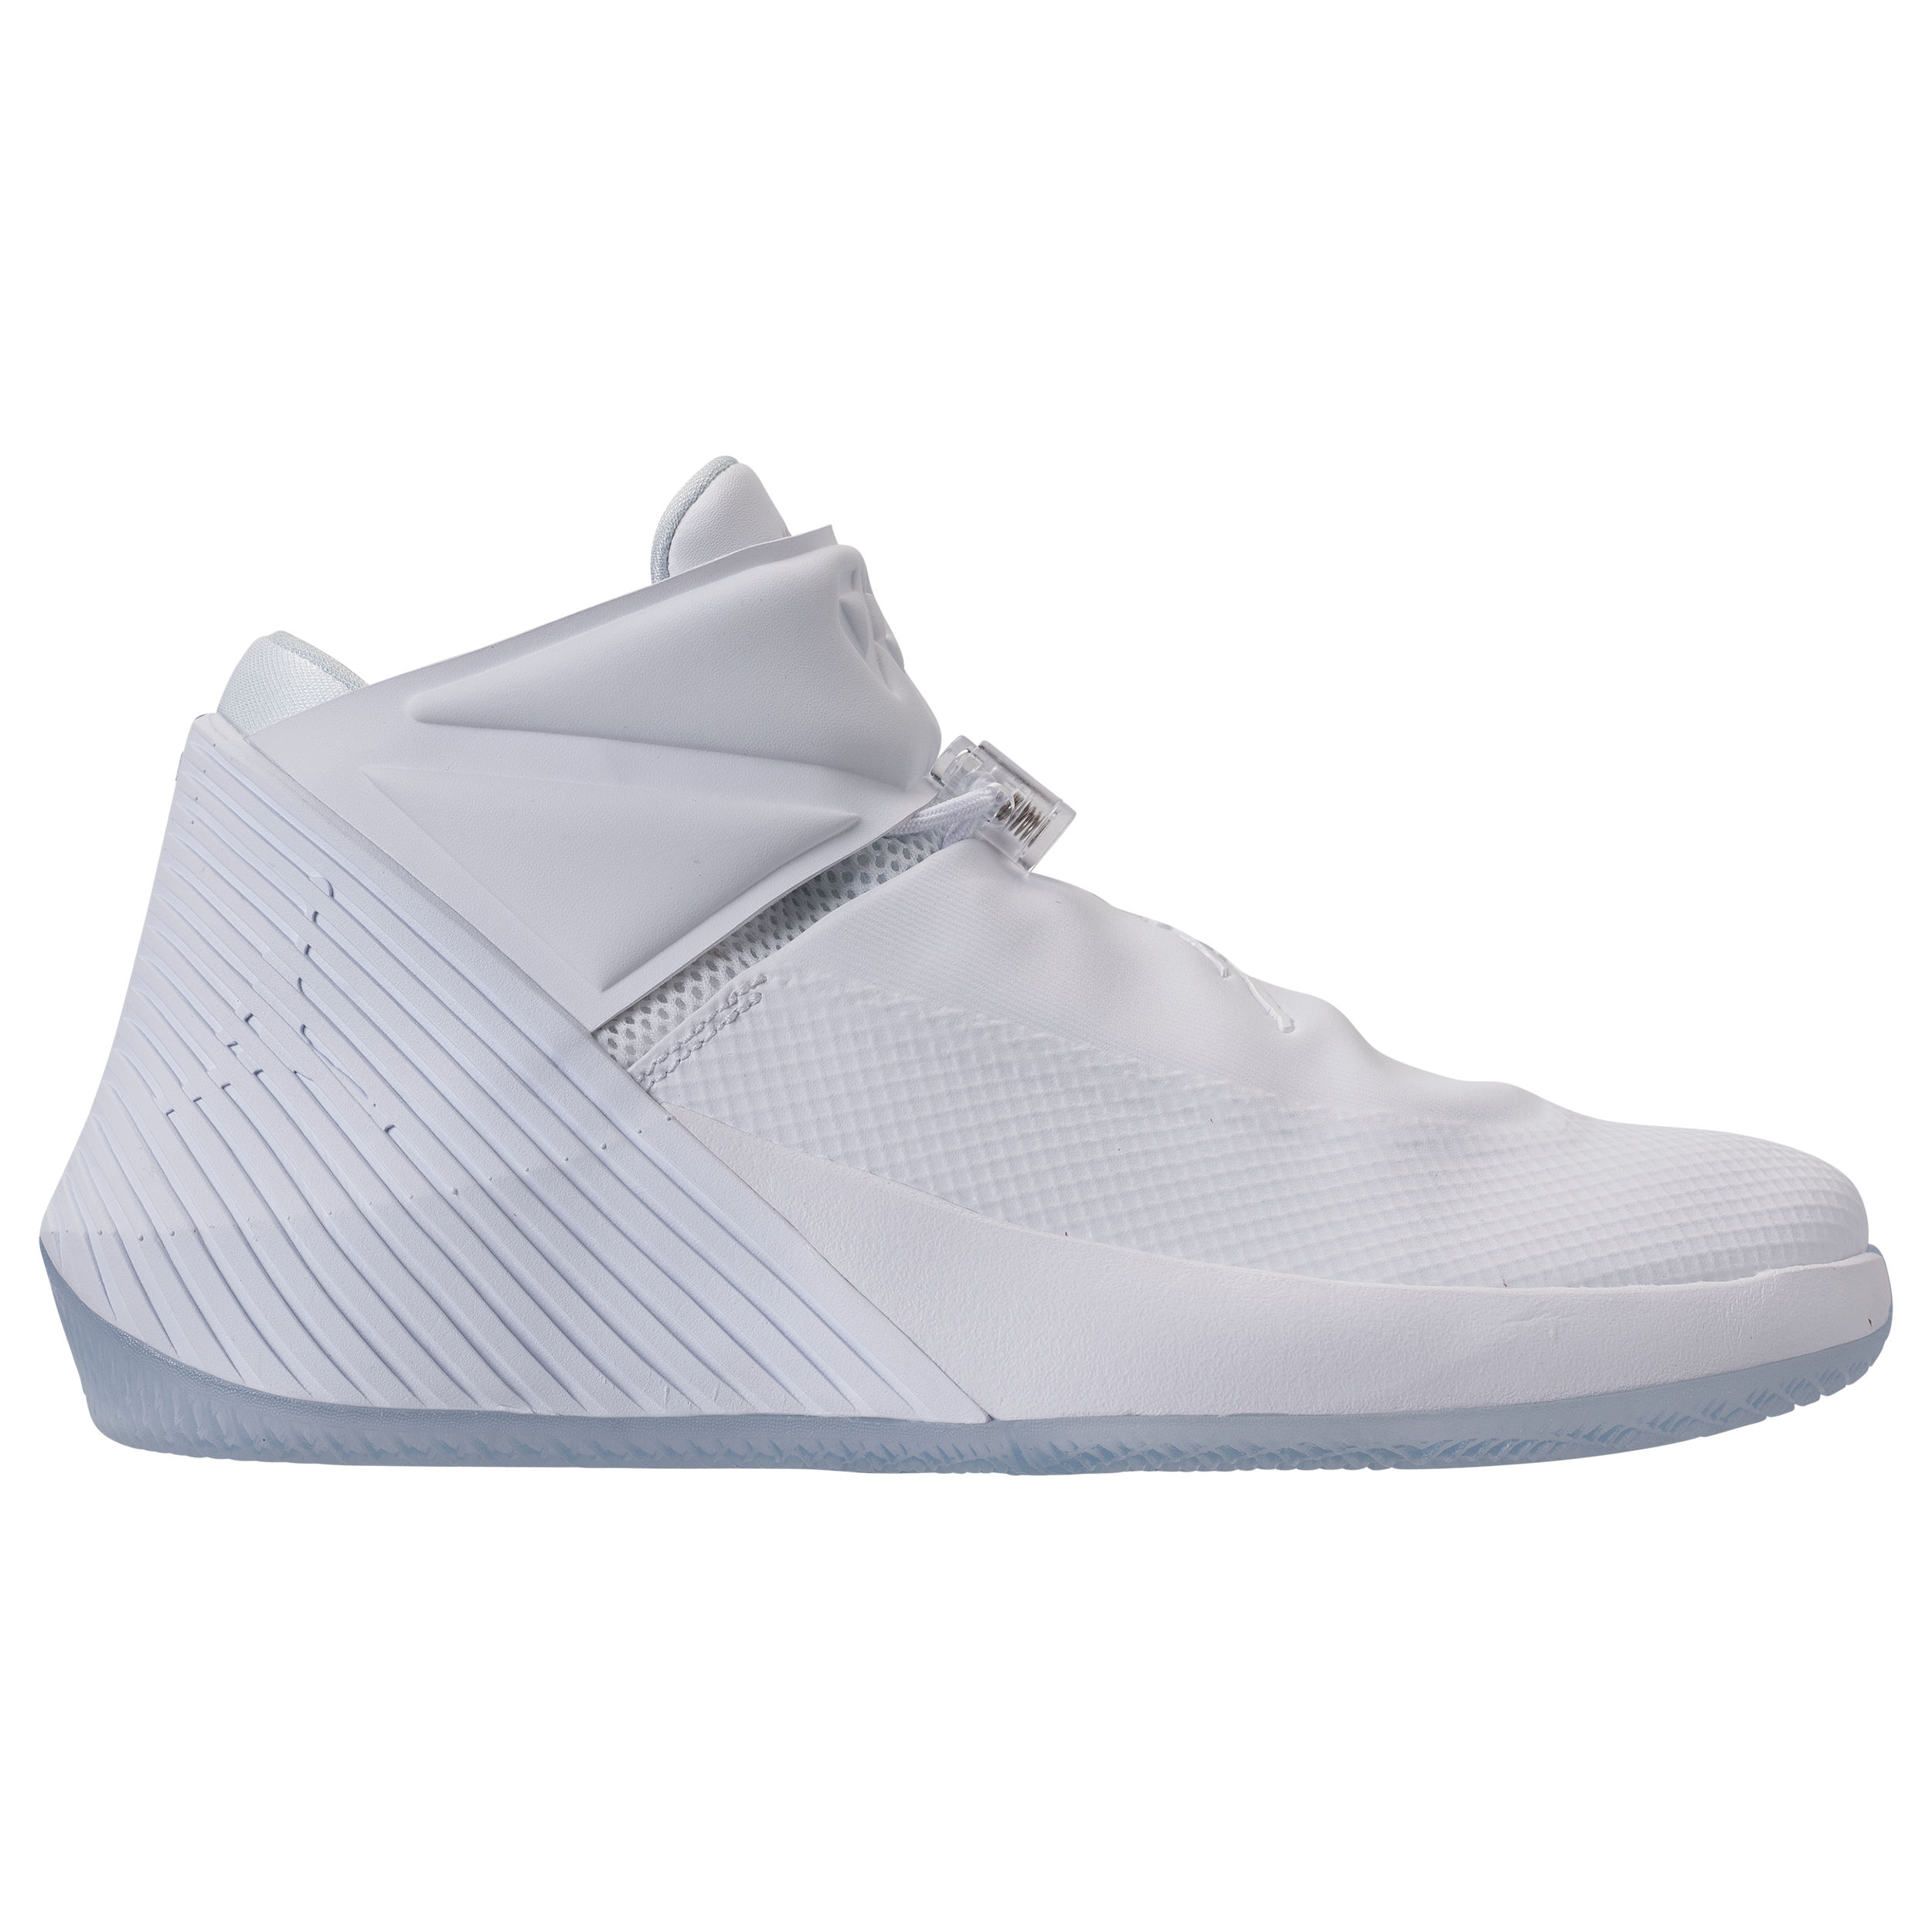 This Triple White Jordan Why Not Zer0.1 Comes a Marker for Customization - WearTesters